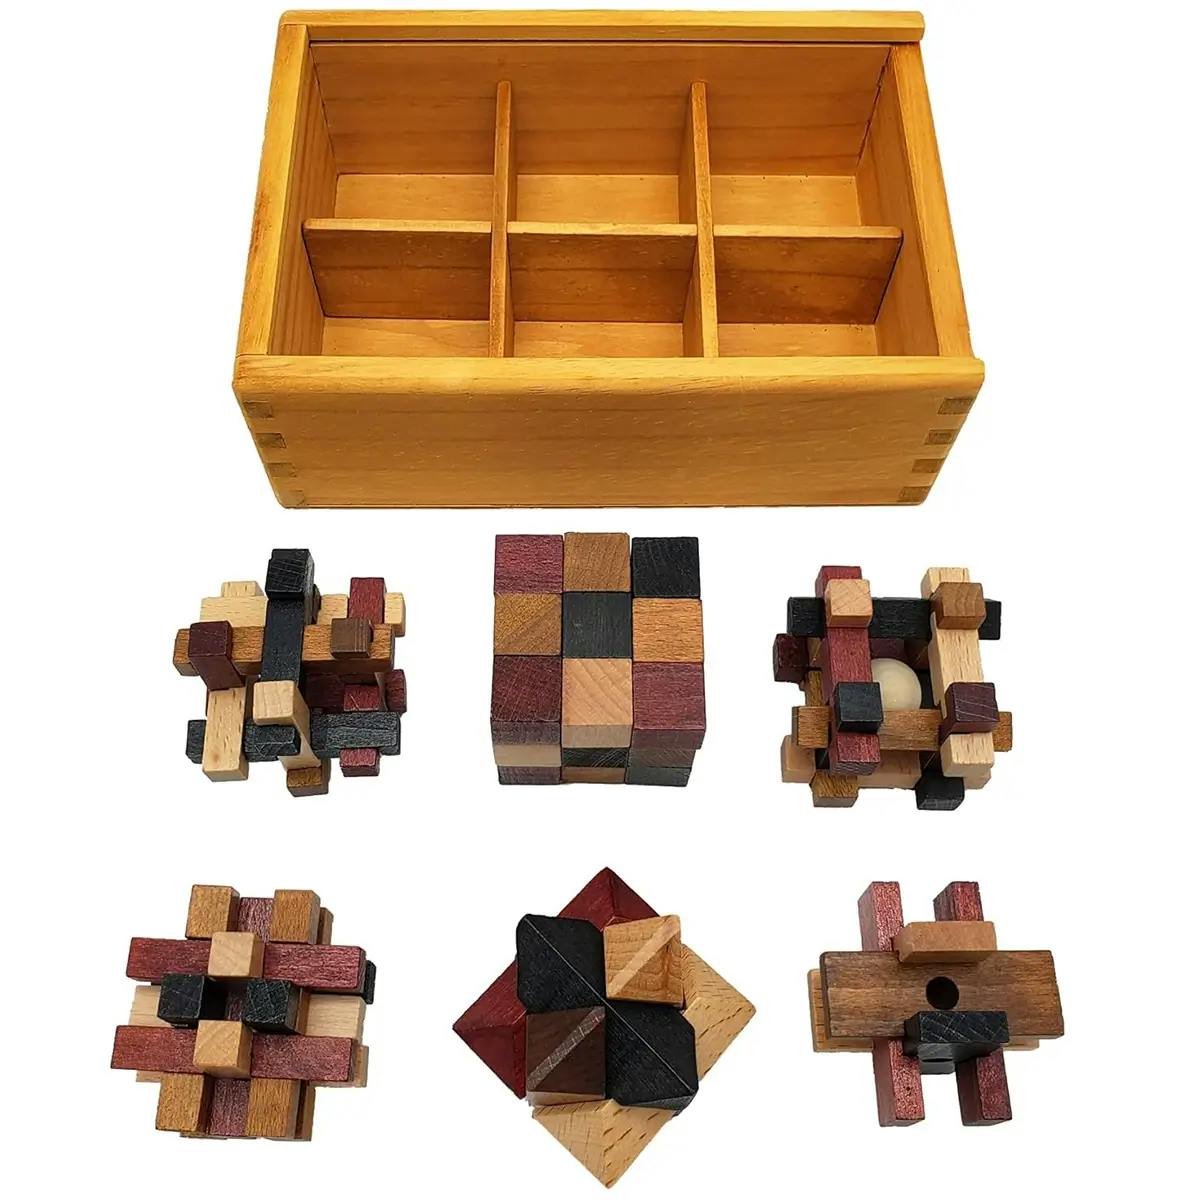 Six wooden 3D brain teaser puzzles and the wooden bog they arrive in.